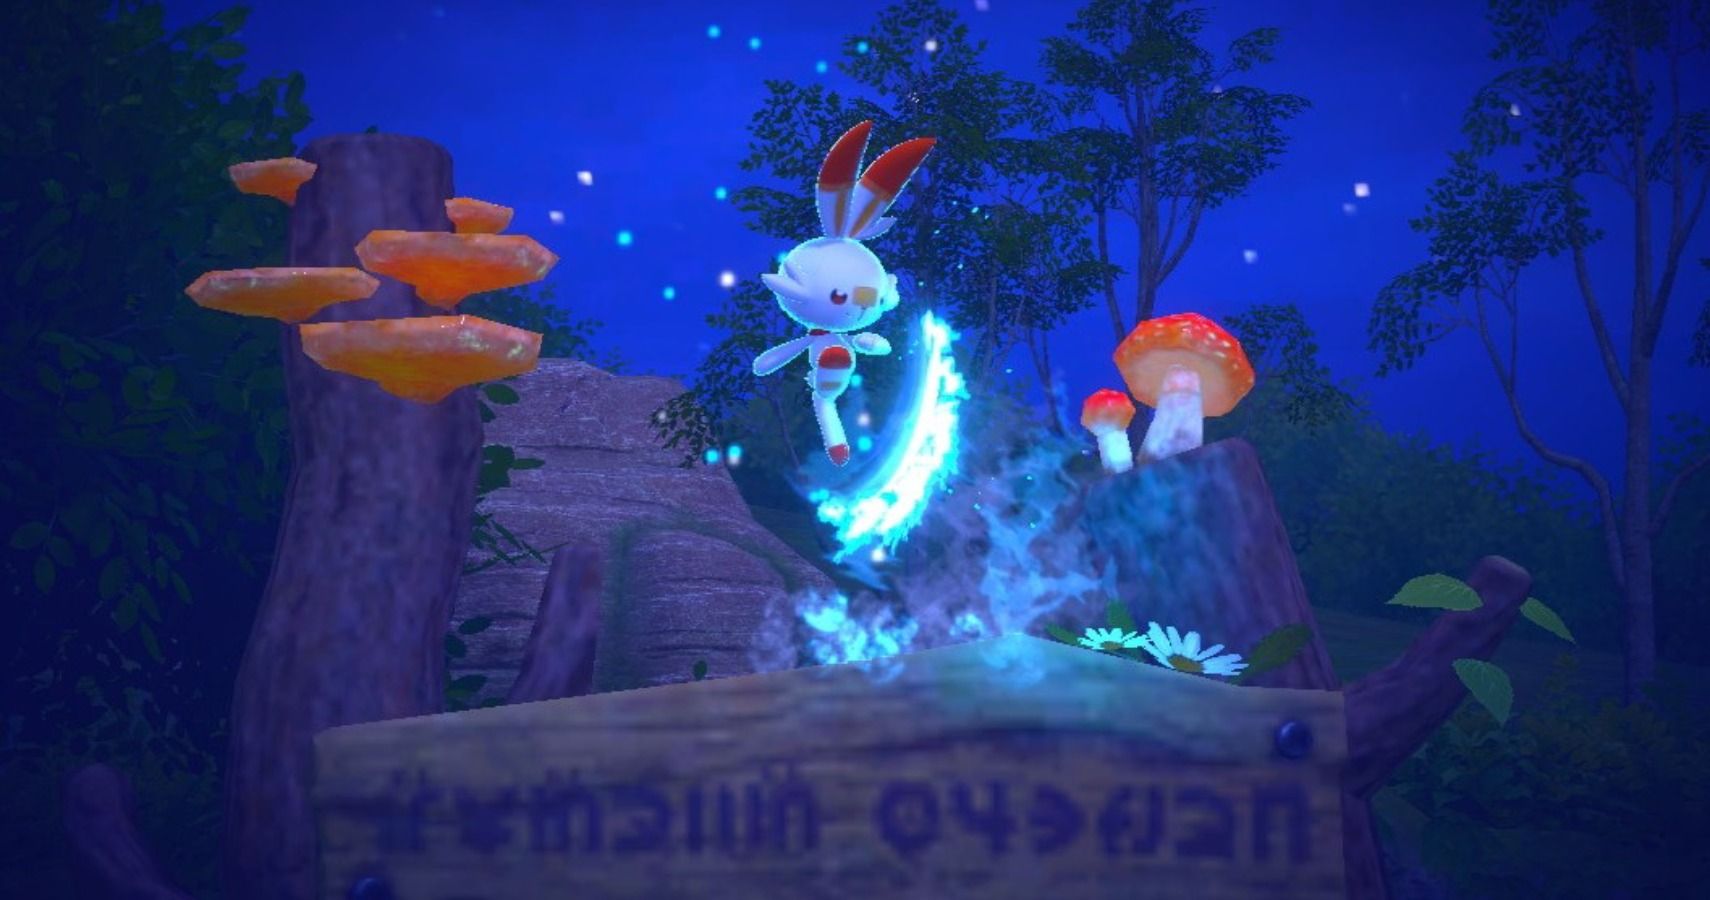 Where to find every starter Pokemon and starter evolution in New Pokemon Snap.